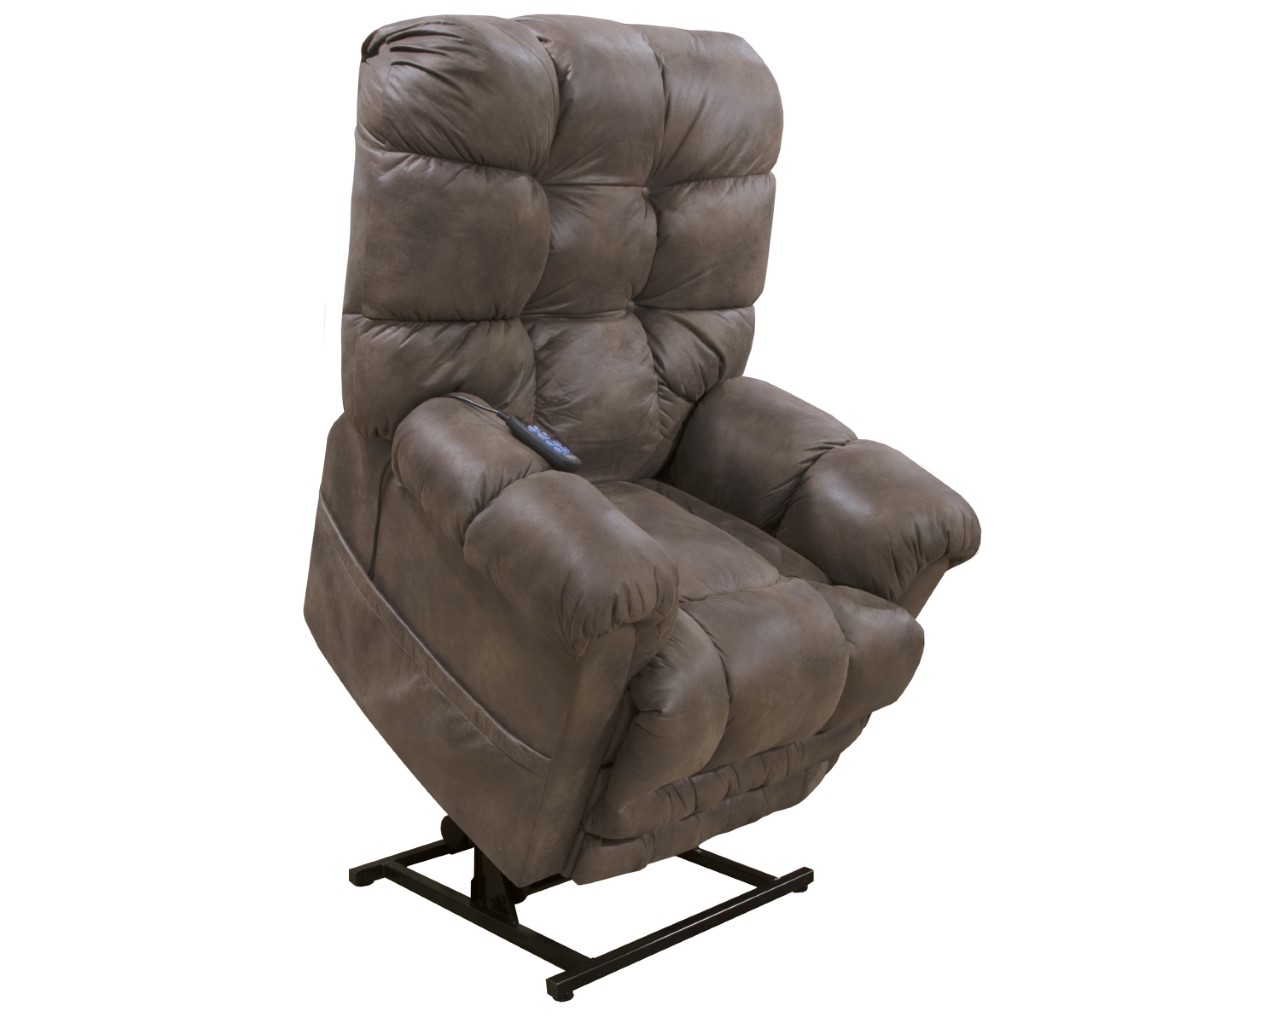 Click photo for details • The Oliver power lift recliner by Catnapper® features: 400LB weight capacity. Steel seat box. Dual motor. Extended ottoman. Polyester • 40"W x 42"D x 42"H • $1,089.99